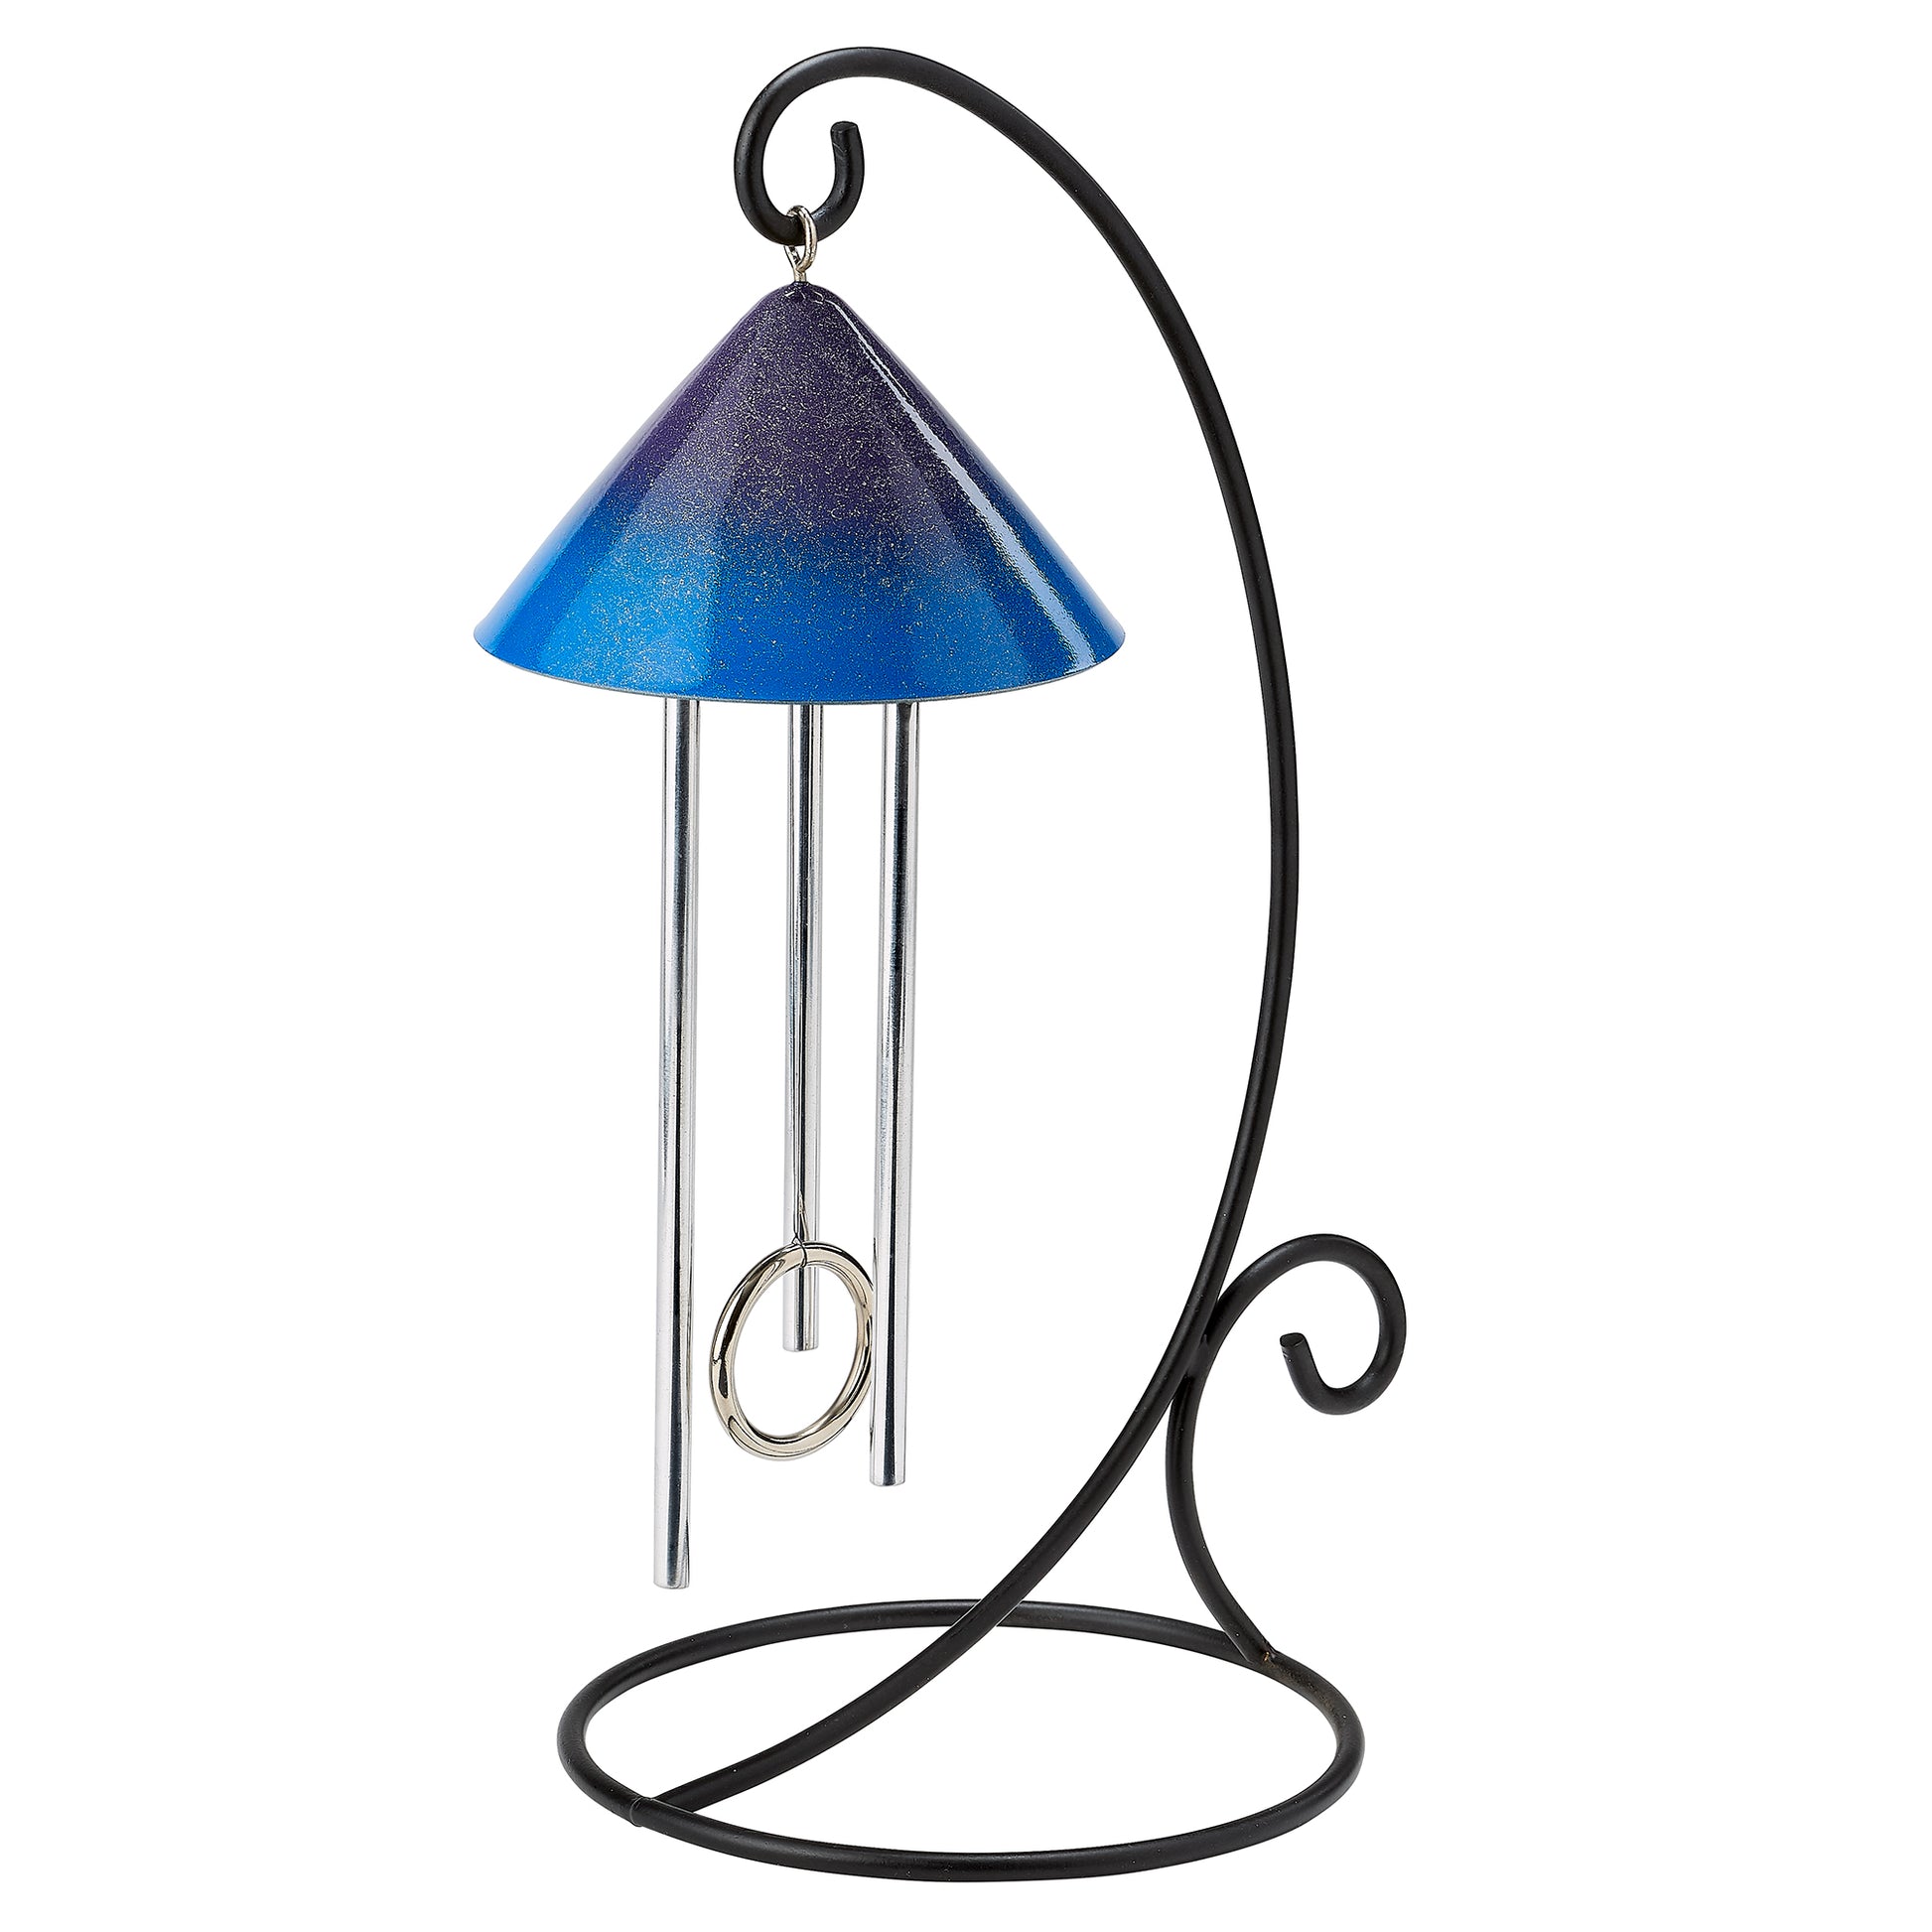 Indoor Tabletop solar wind chime  in blue purple color  made in US